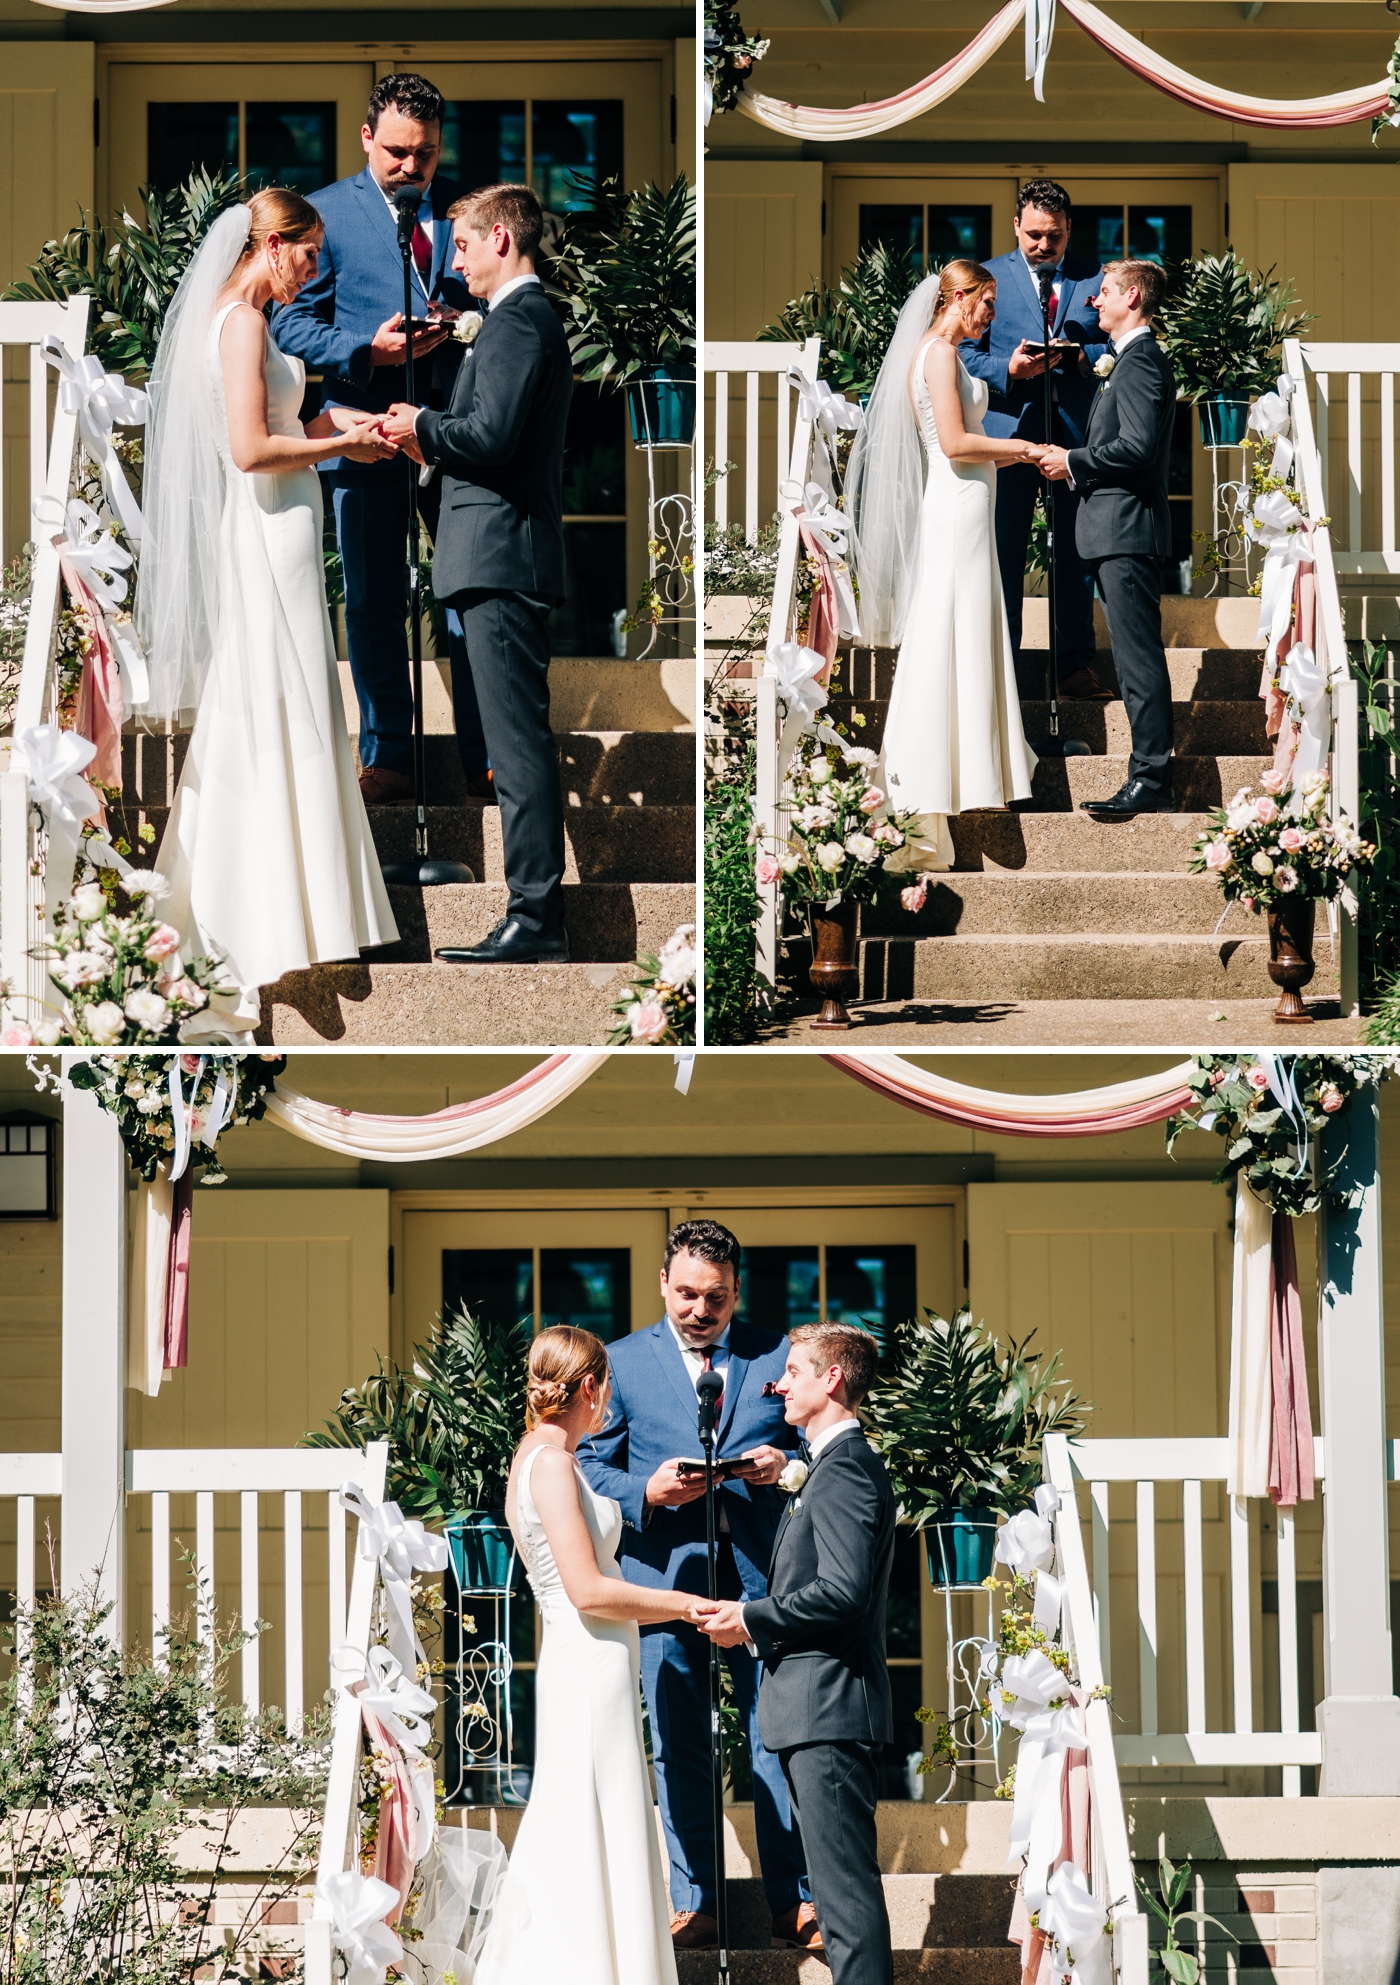 Outdoor wedding ceremony at the Chapel Shelter